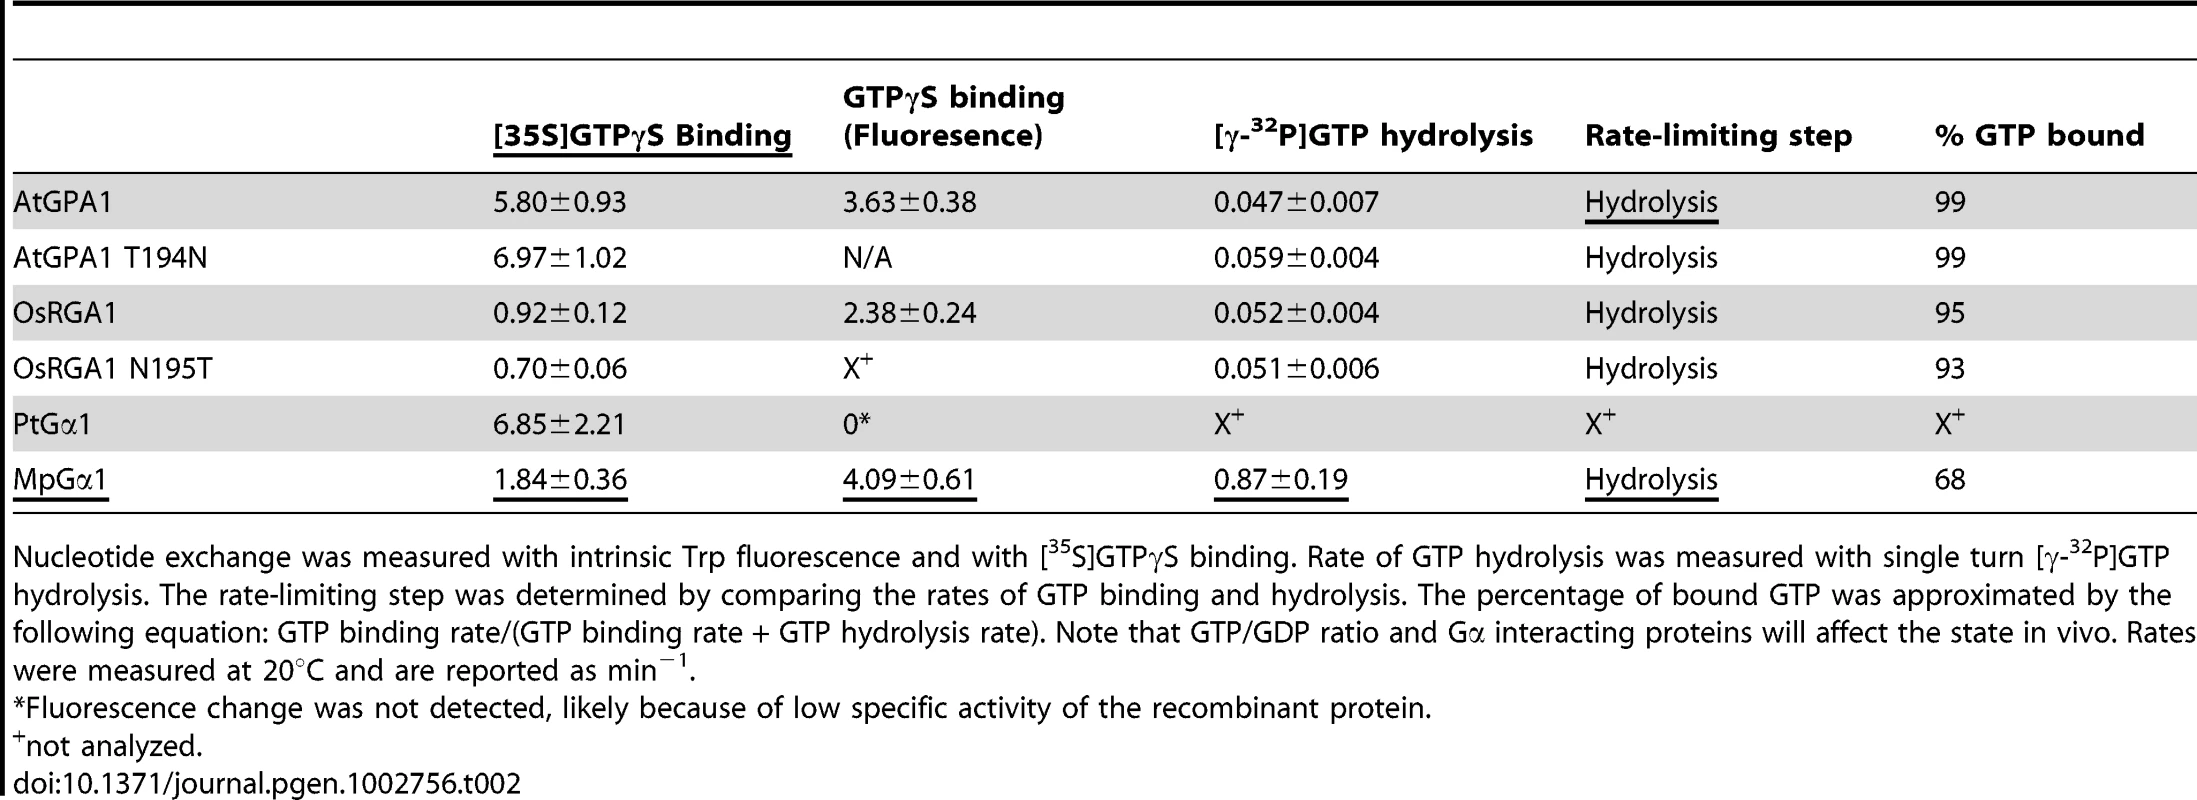 Rates of nucleotide exchange and GTP hydrolysis.